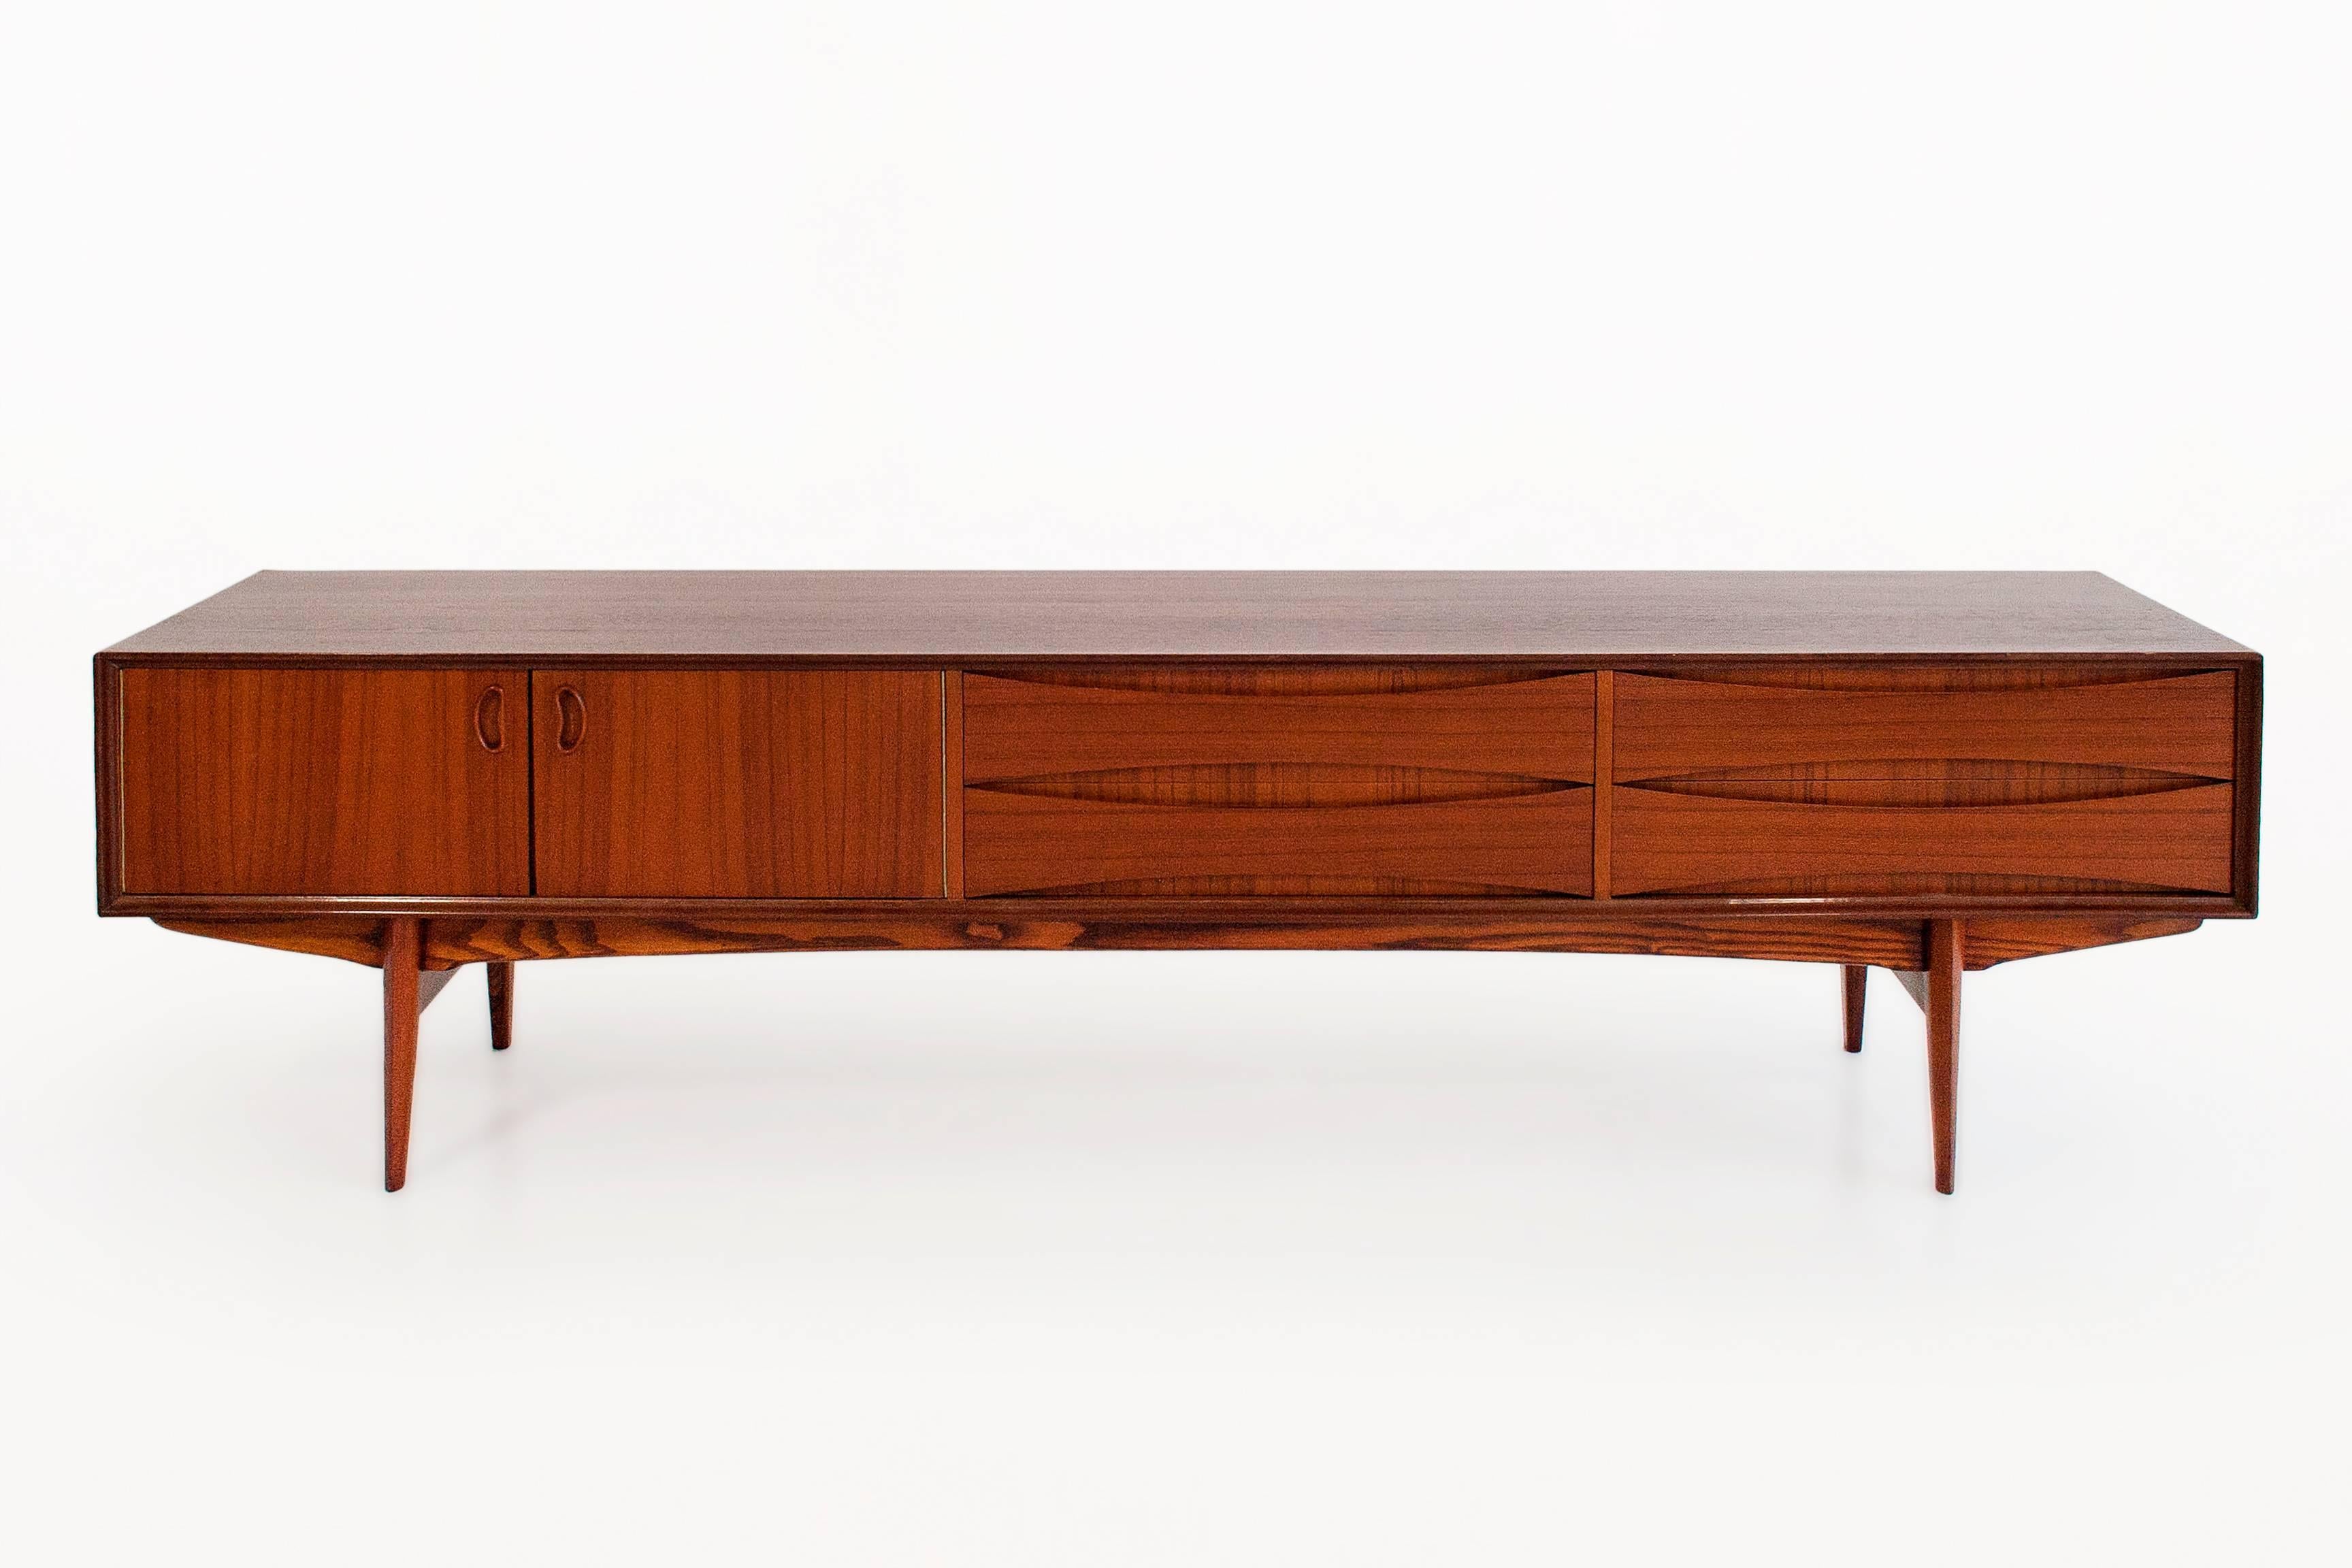 Teak sideboard by Arne Vodder
Beautiful design and proportions
Interior divided in four sections: Two doors and four drawers
circa 1960, Denmark 
Very good vintage condition.